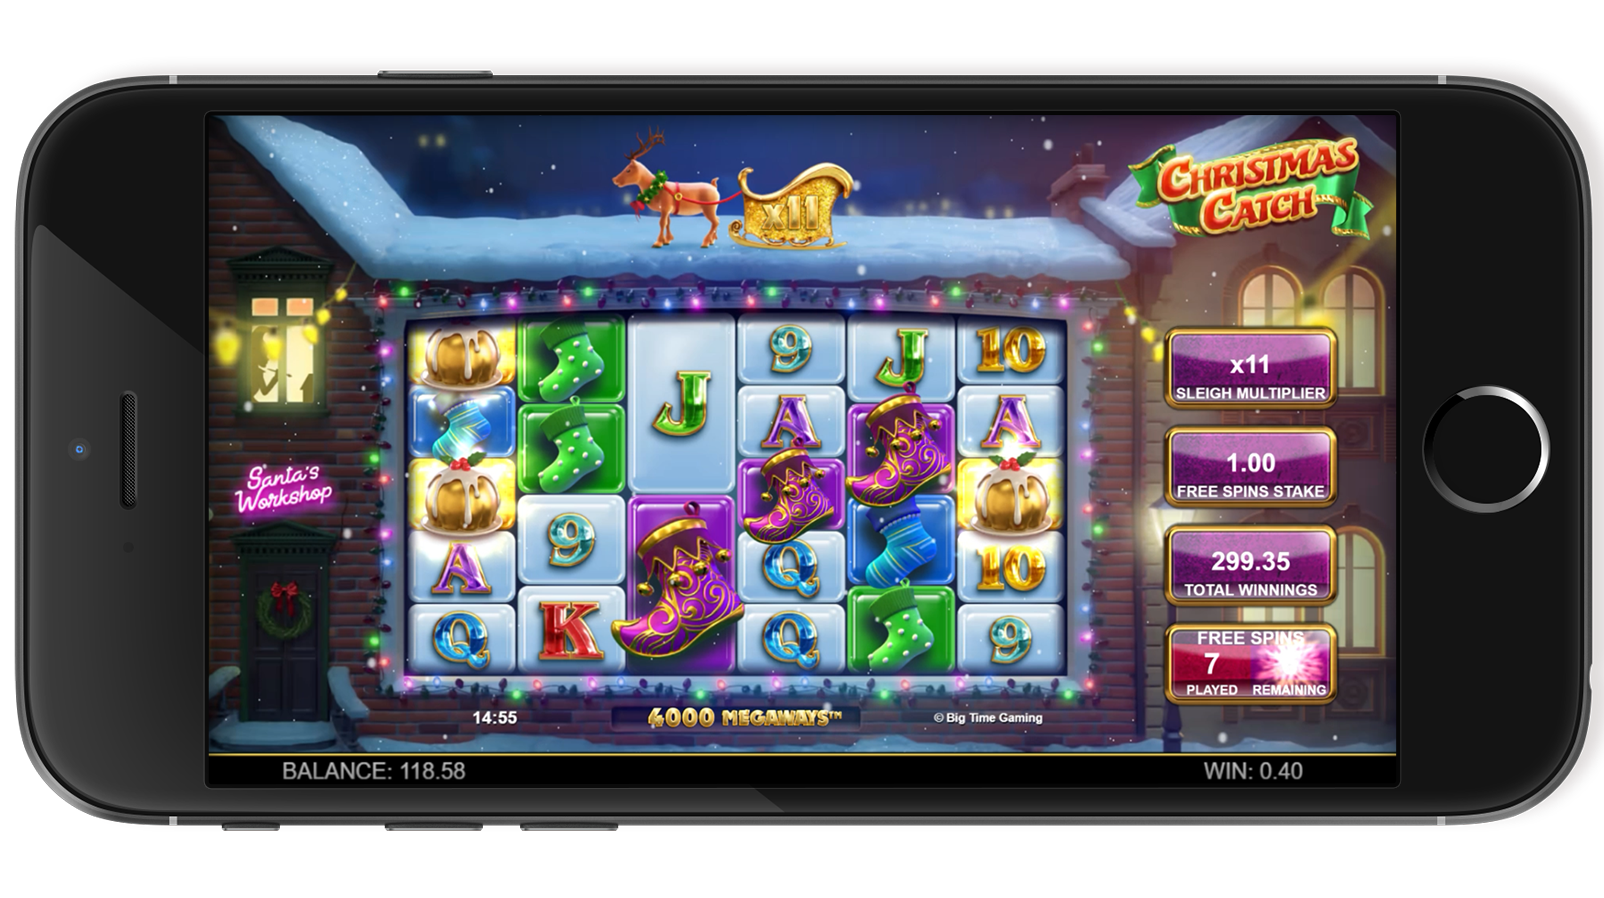 ChristmasCatch_FreeSpins_12_mobile.png